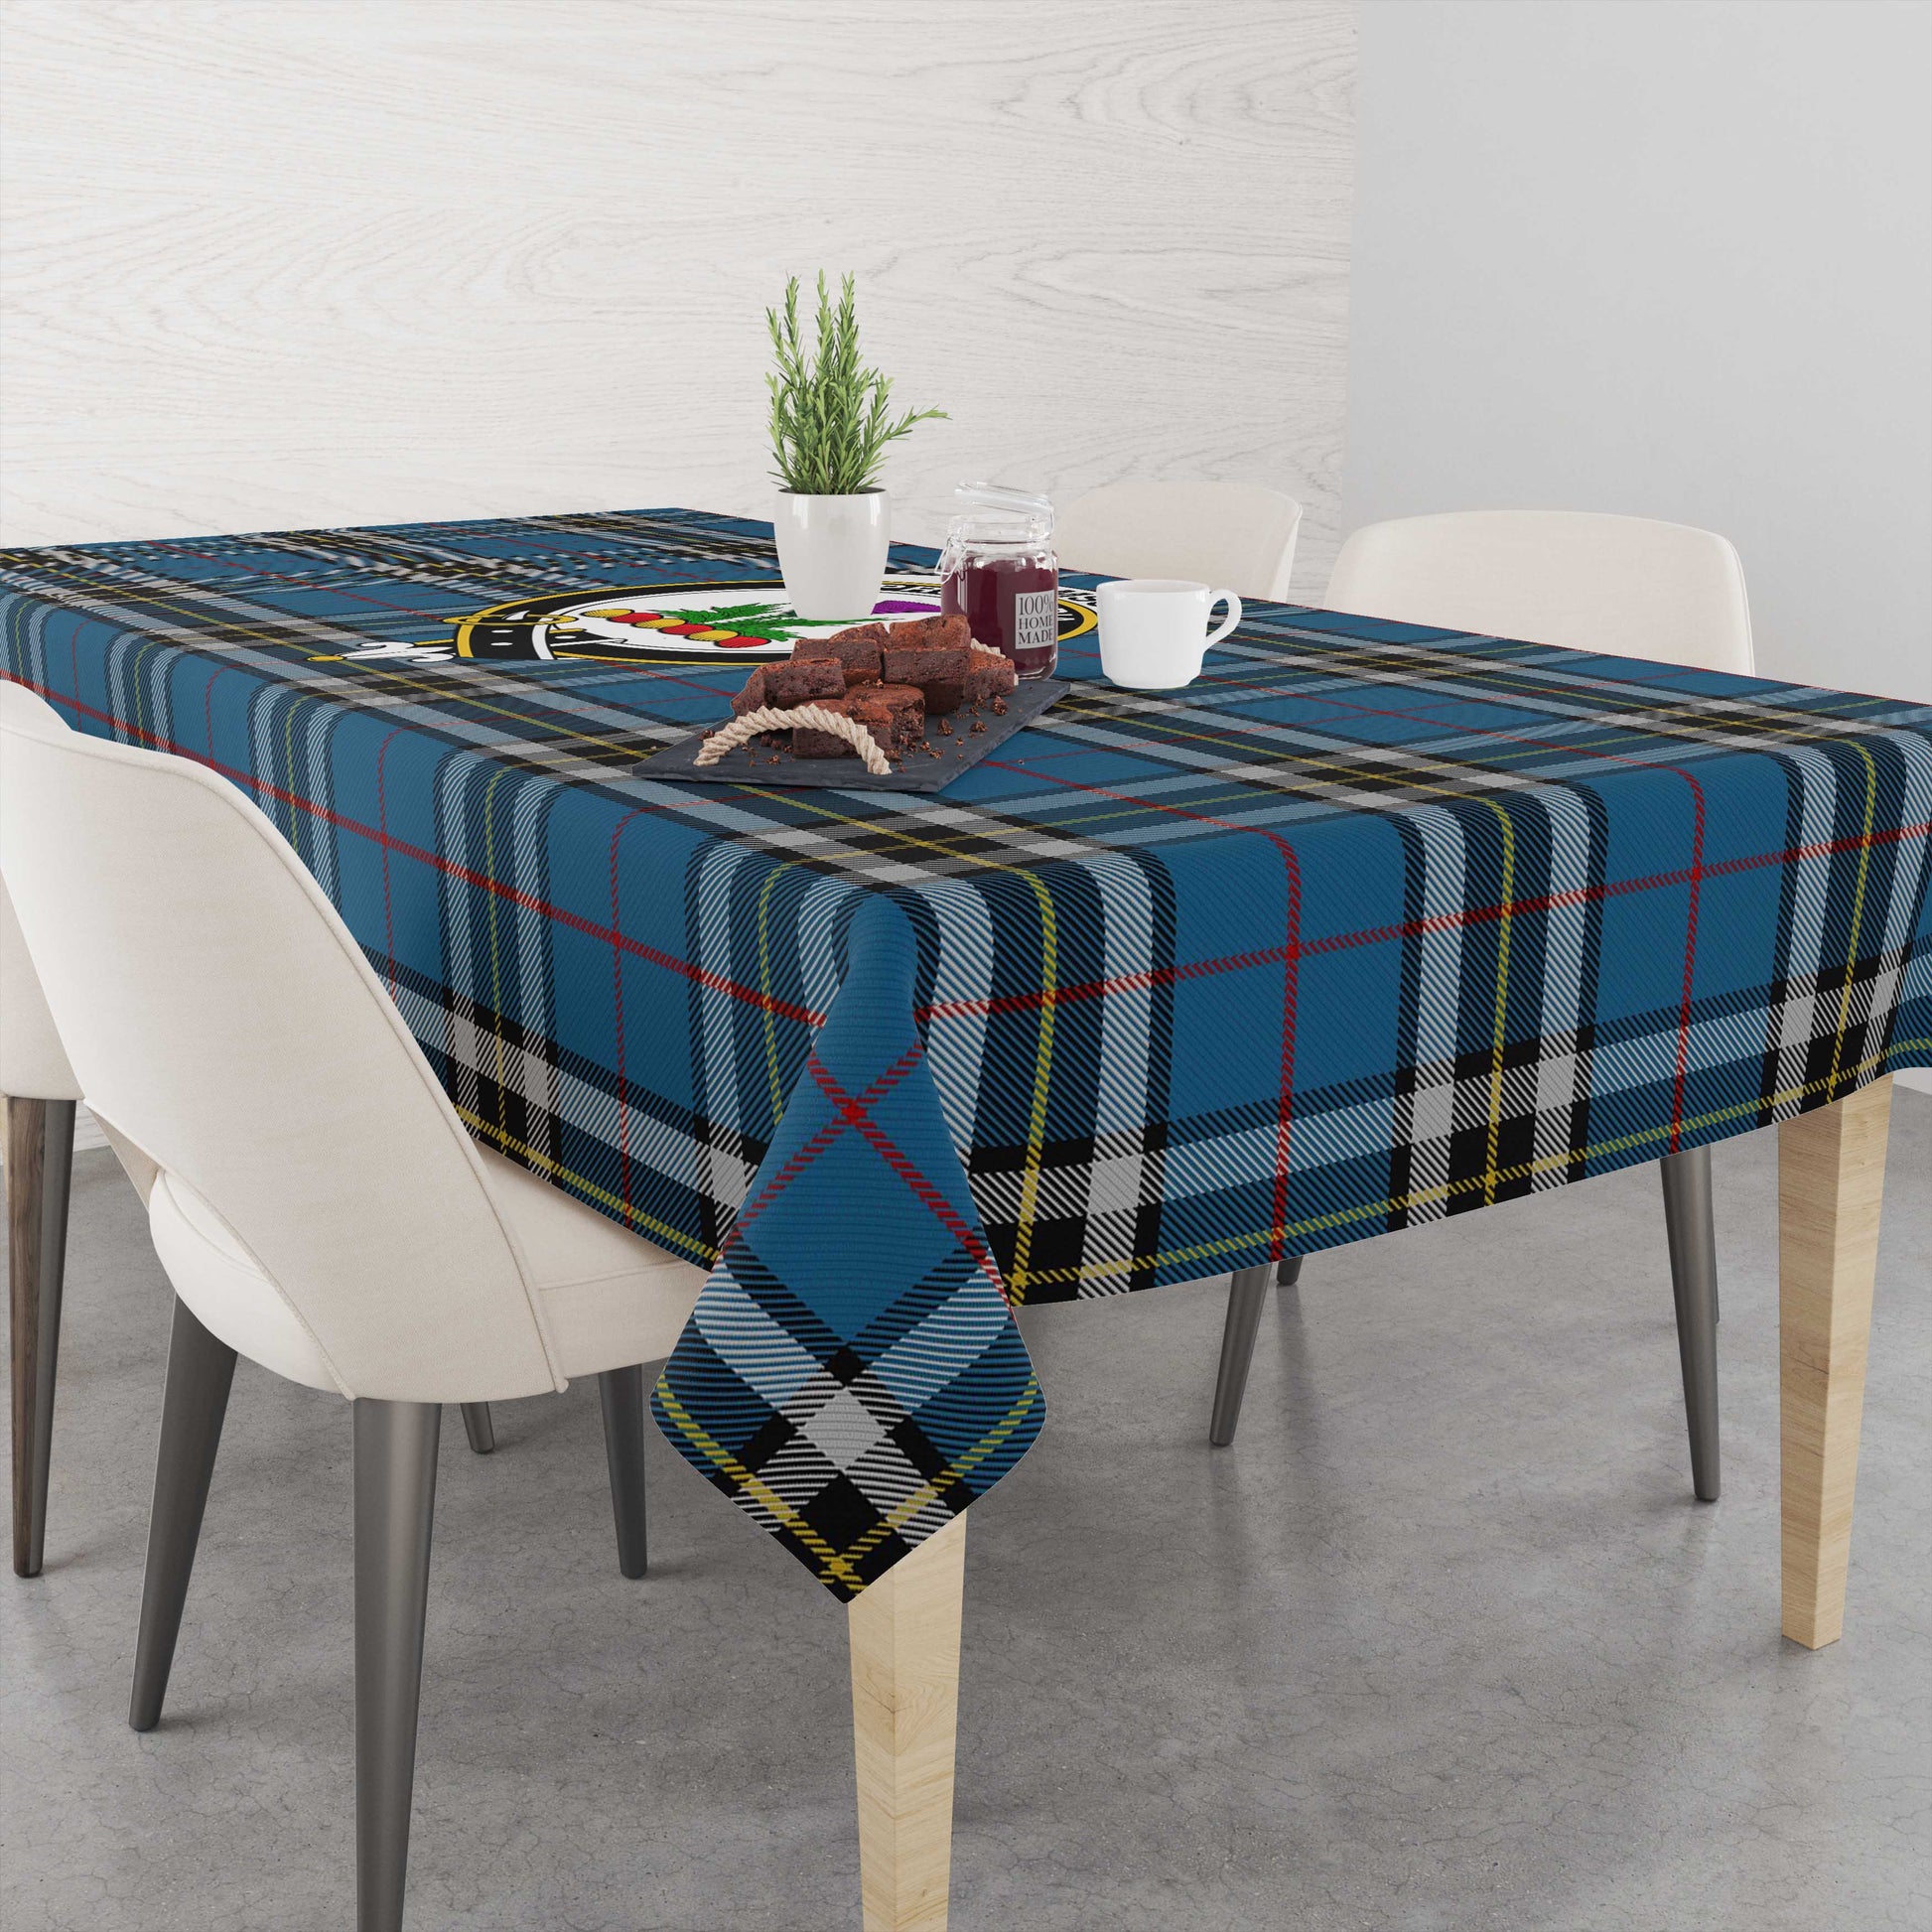 thomson-dress-blue-tatan-tablecloth-with-family-crest